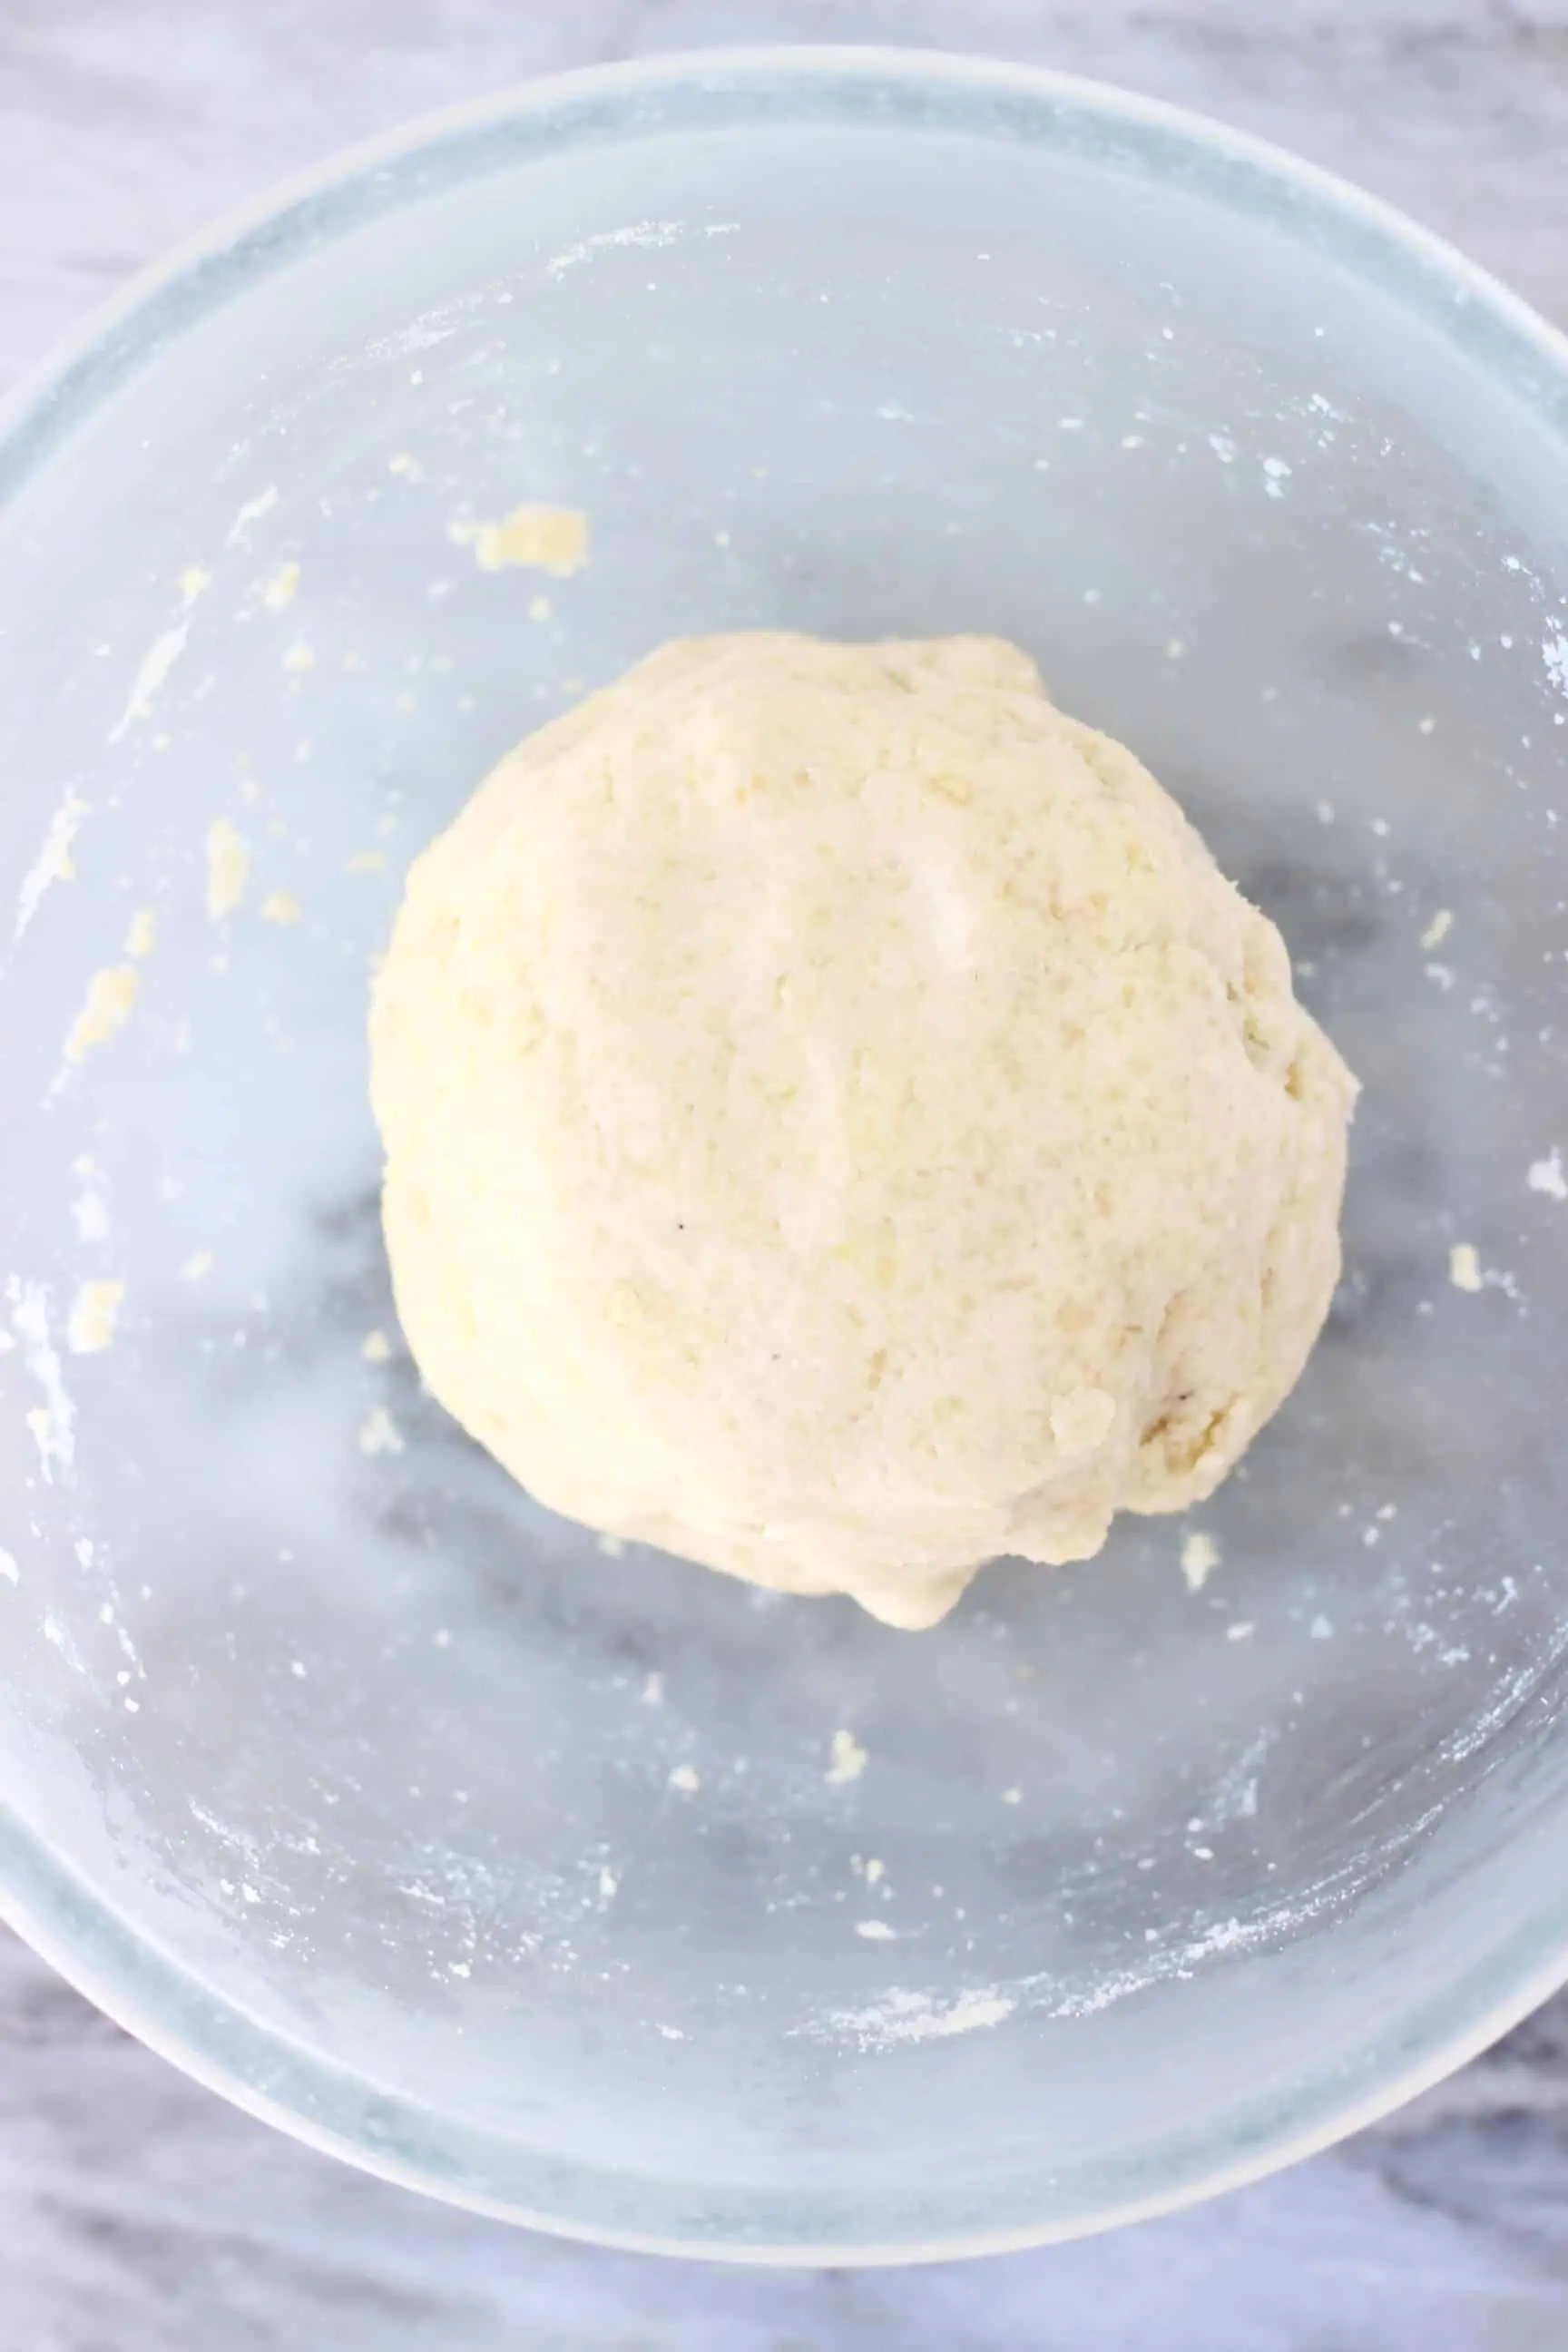 A ball of gluten-free vegan pastry dough in a bowl